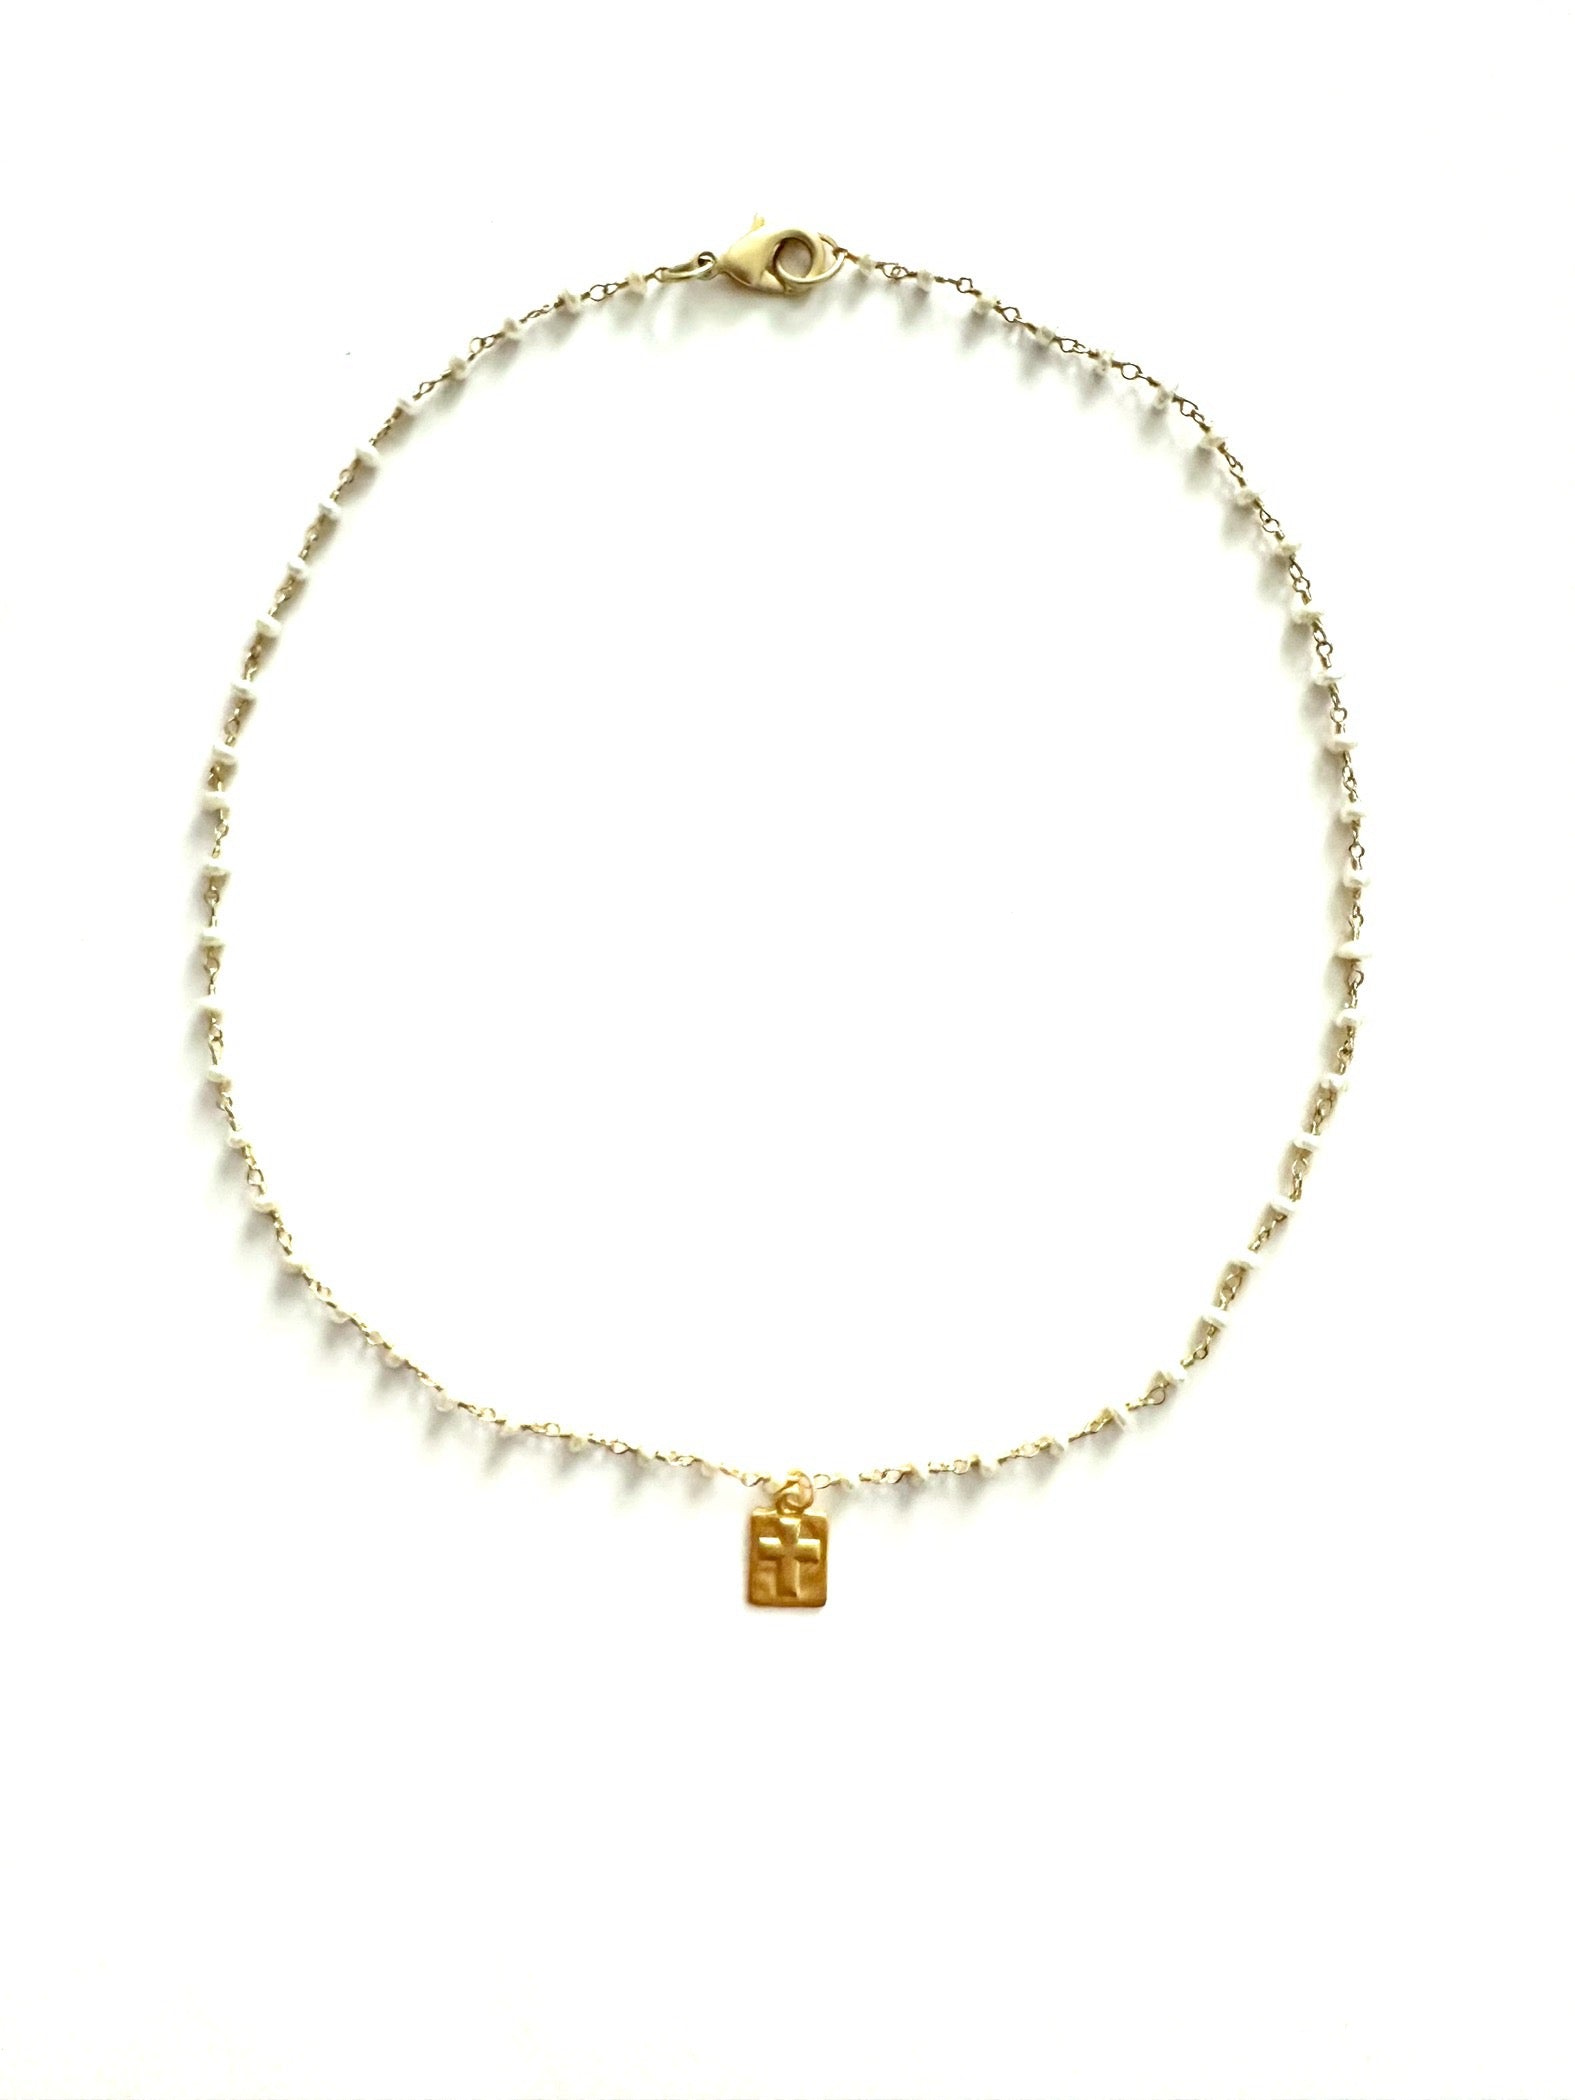 Mini Pearl Cross - pearl rosary necklace with vermeil cross pendant